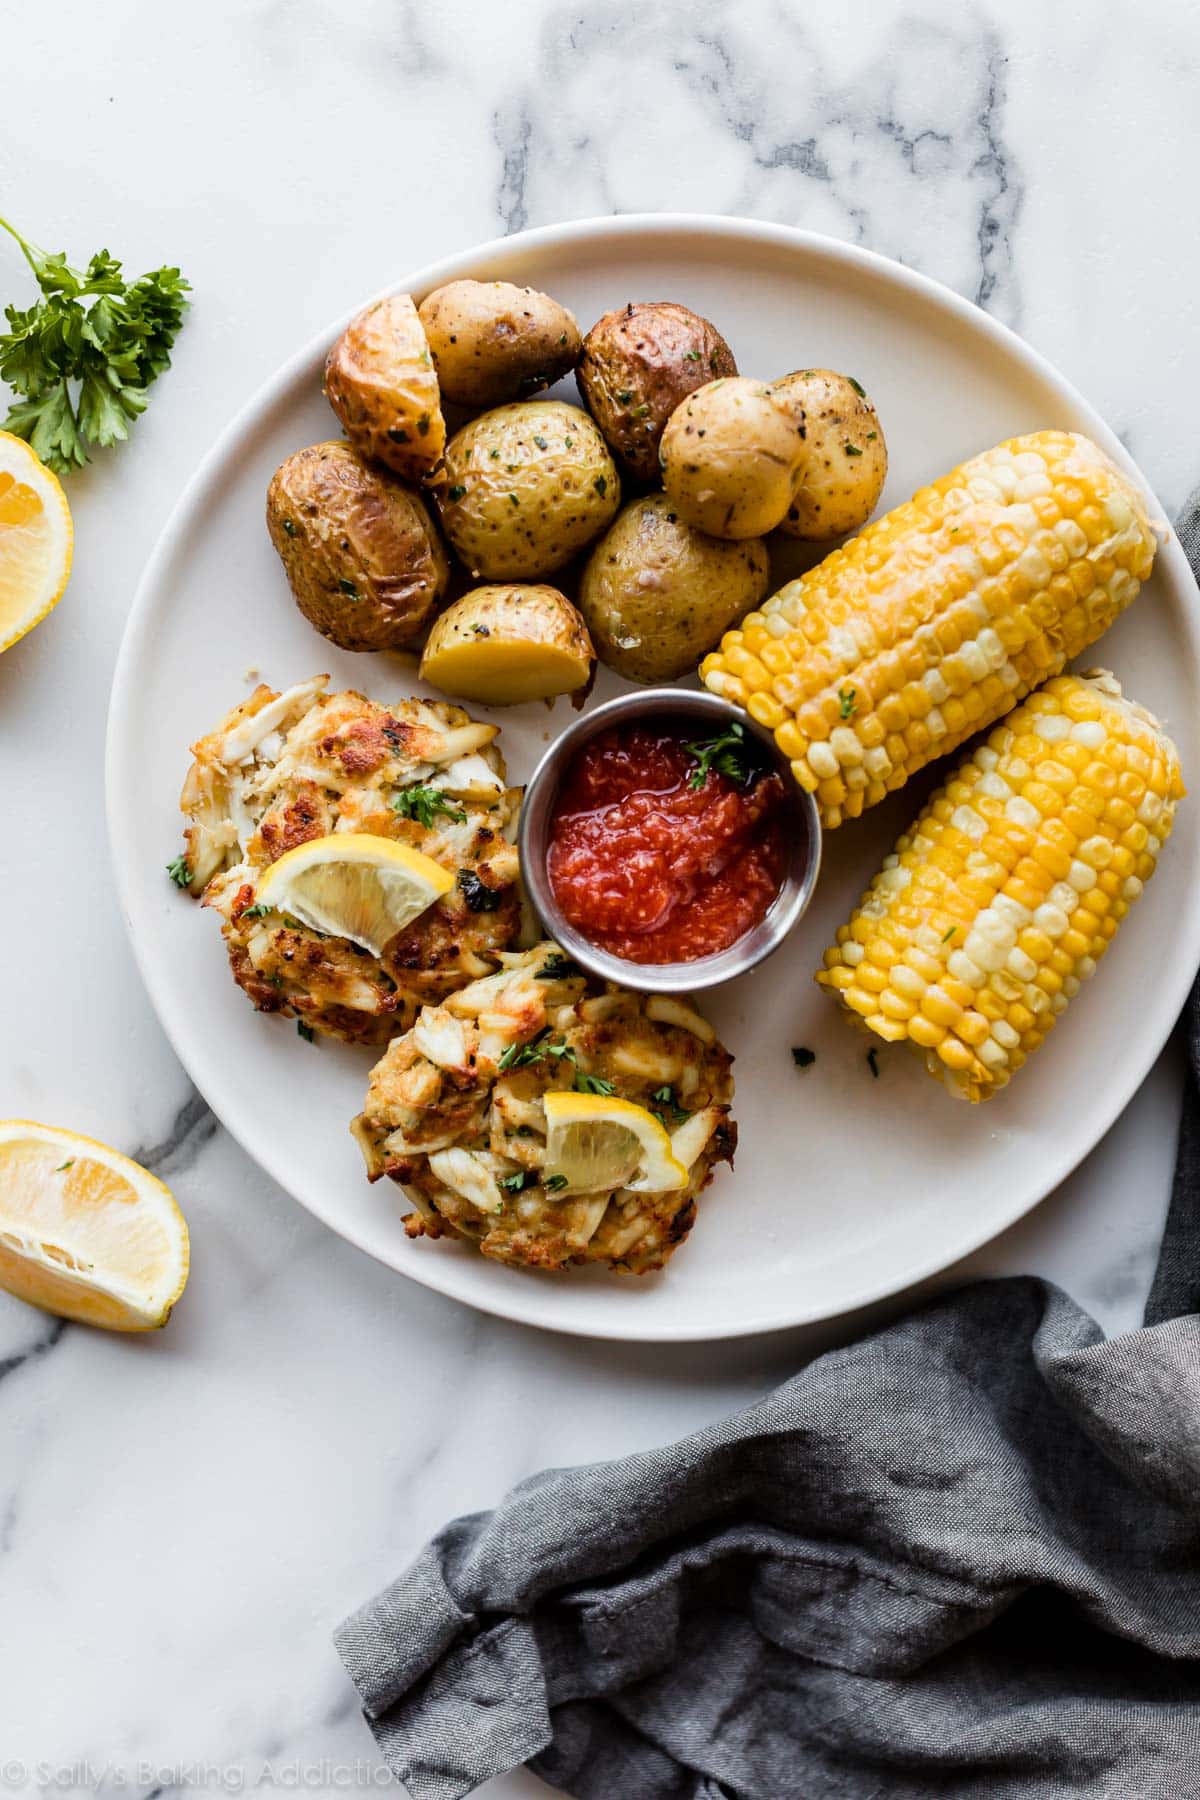 Crab cake meal with corn and potatoes